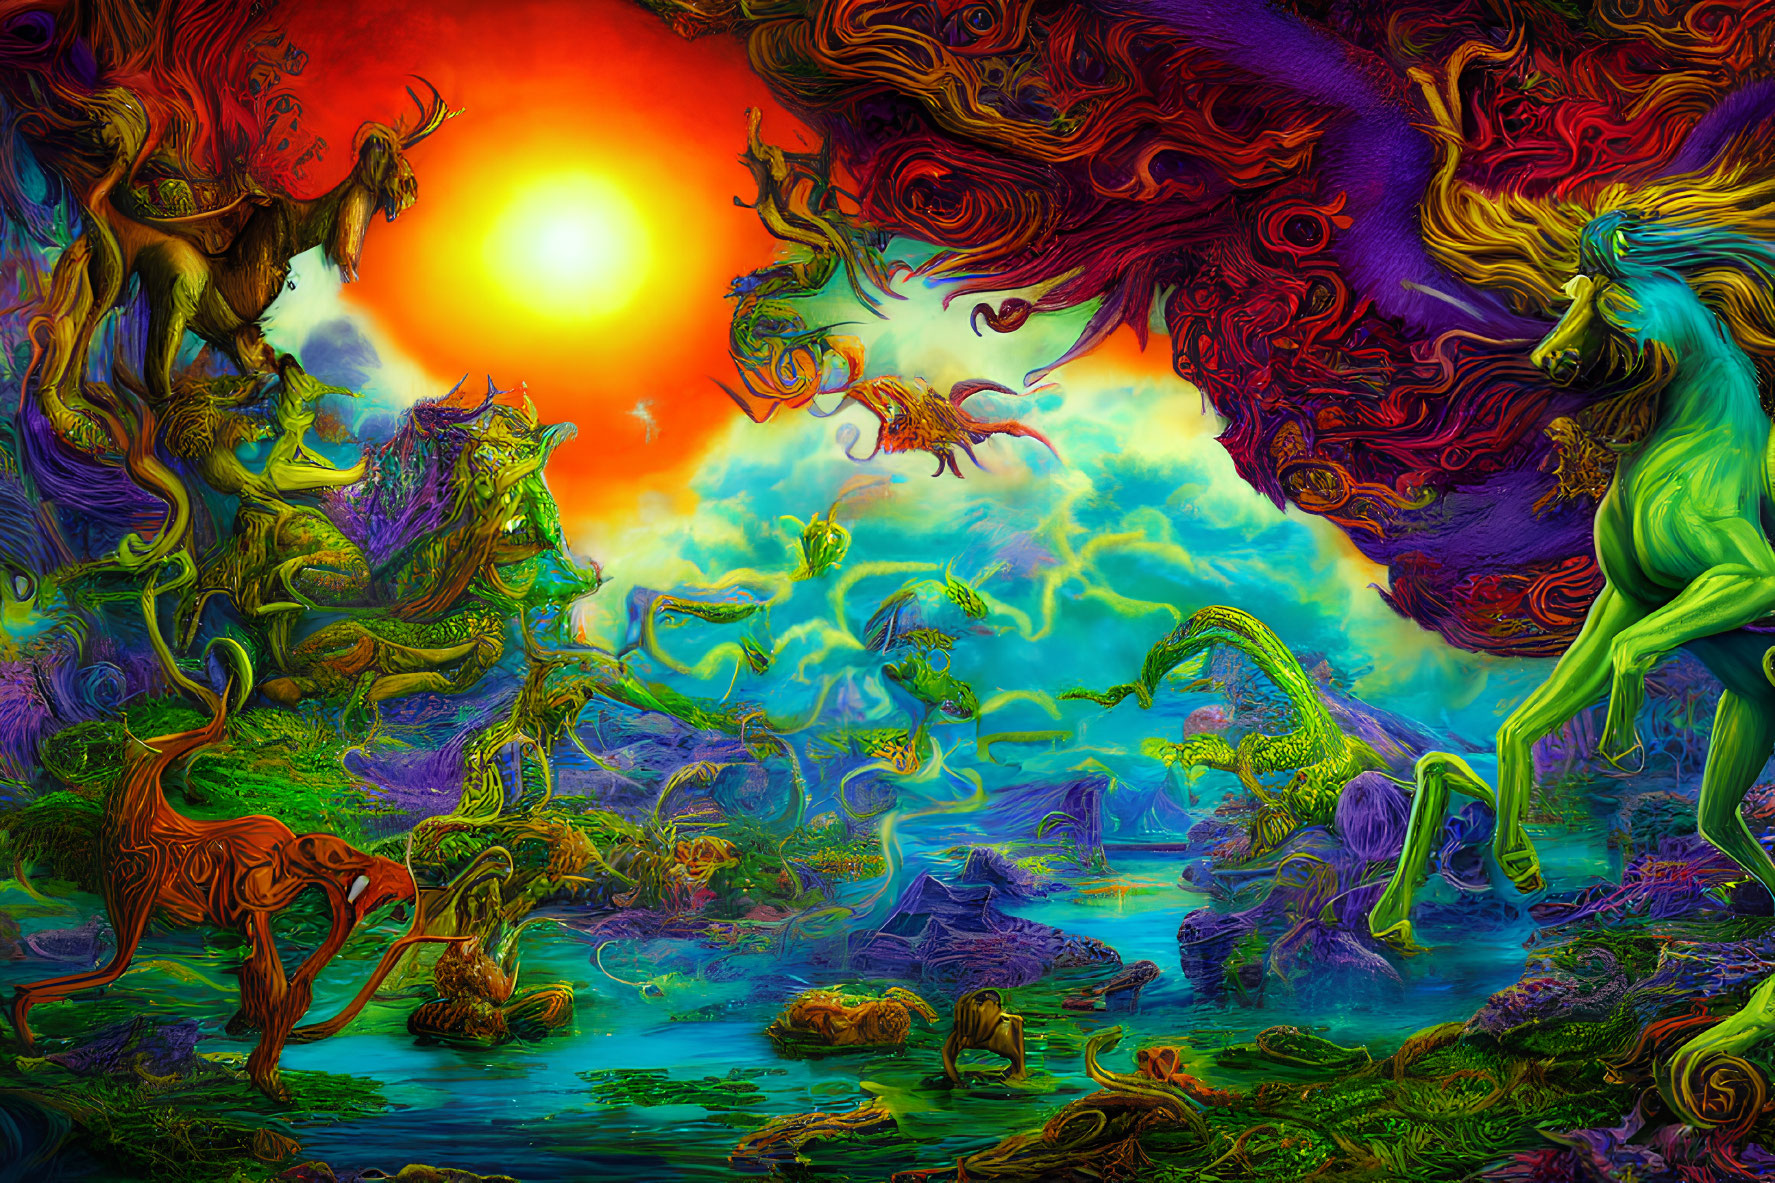 Fantastical landscape with vibrant creatures and radiant sun